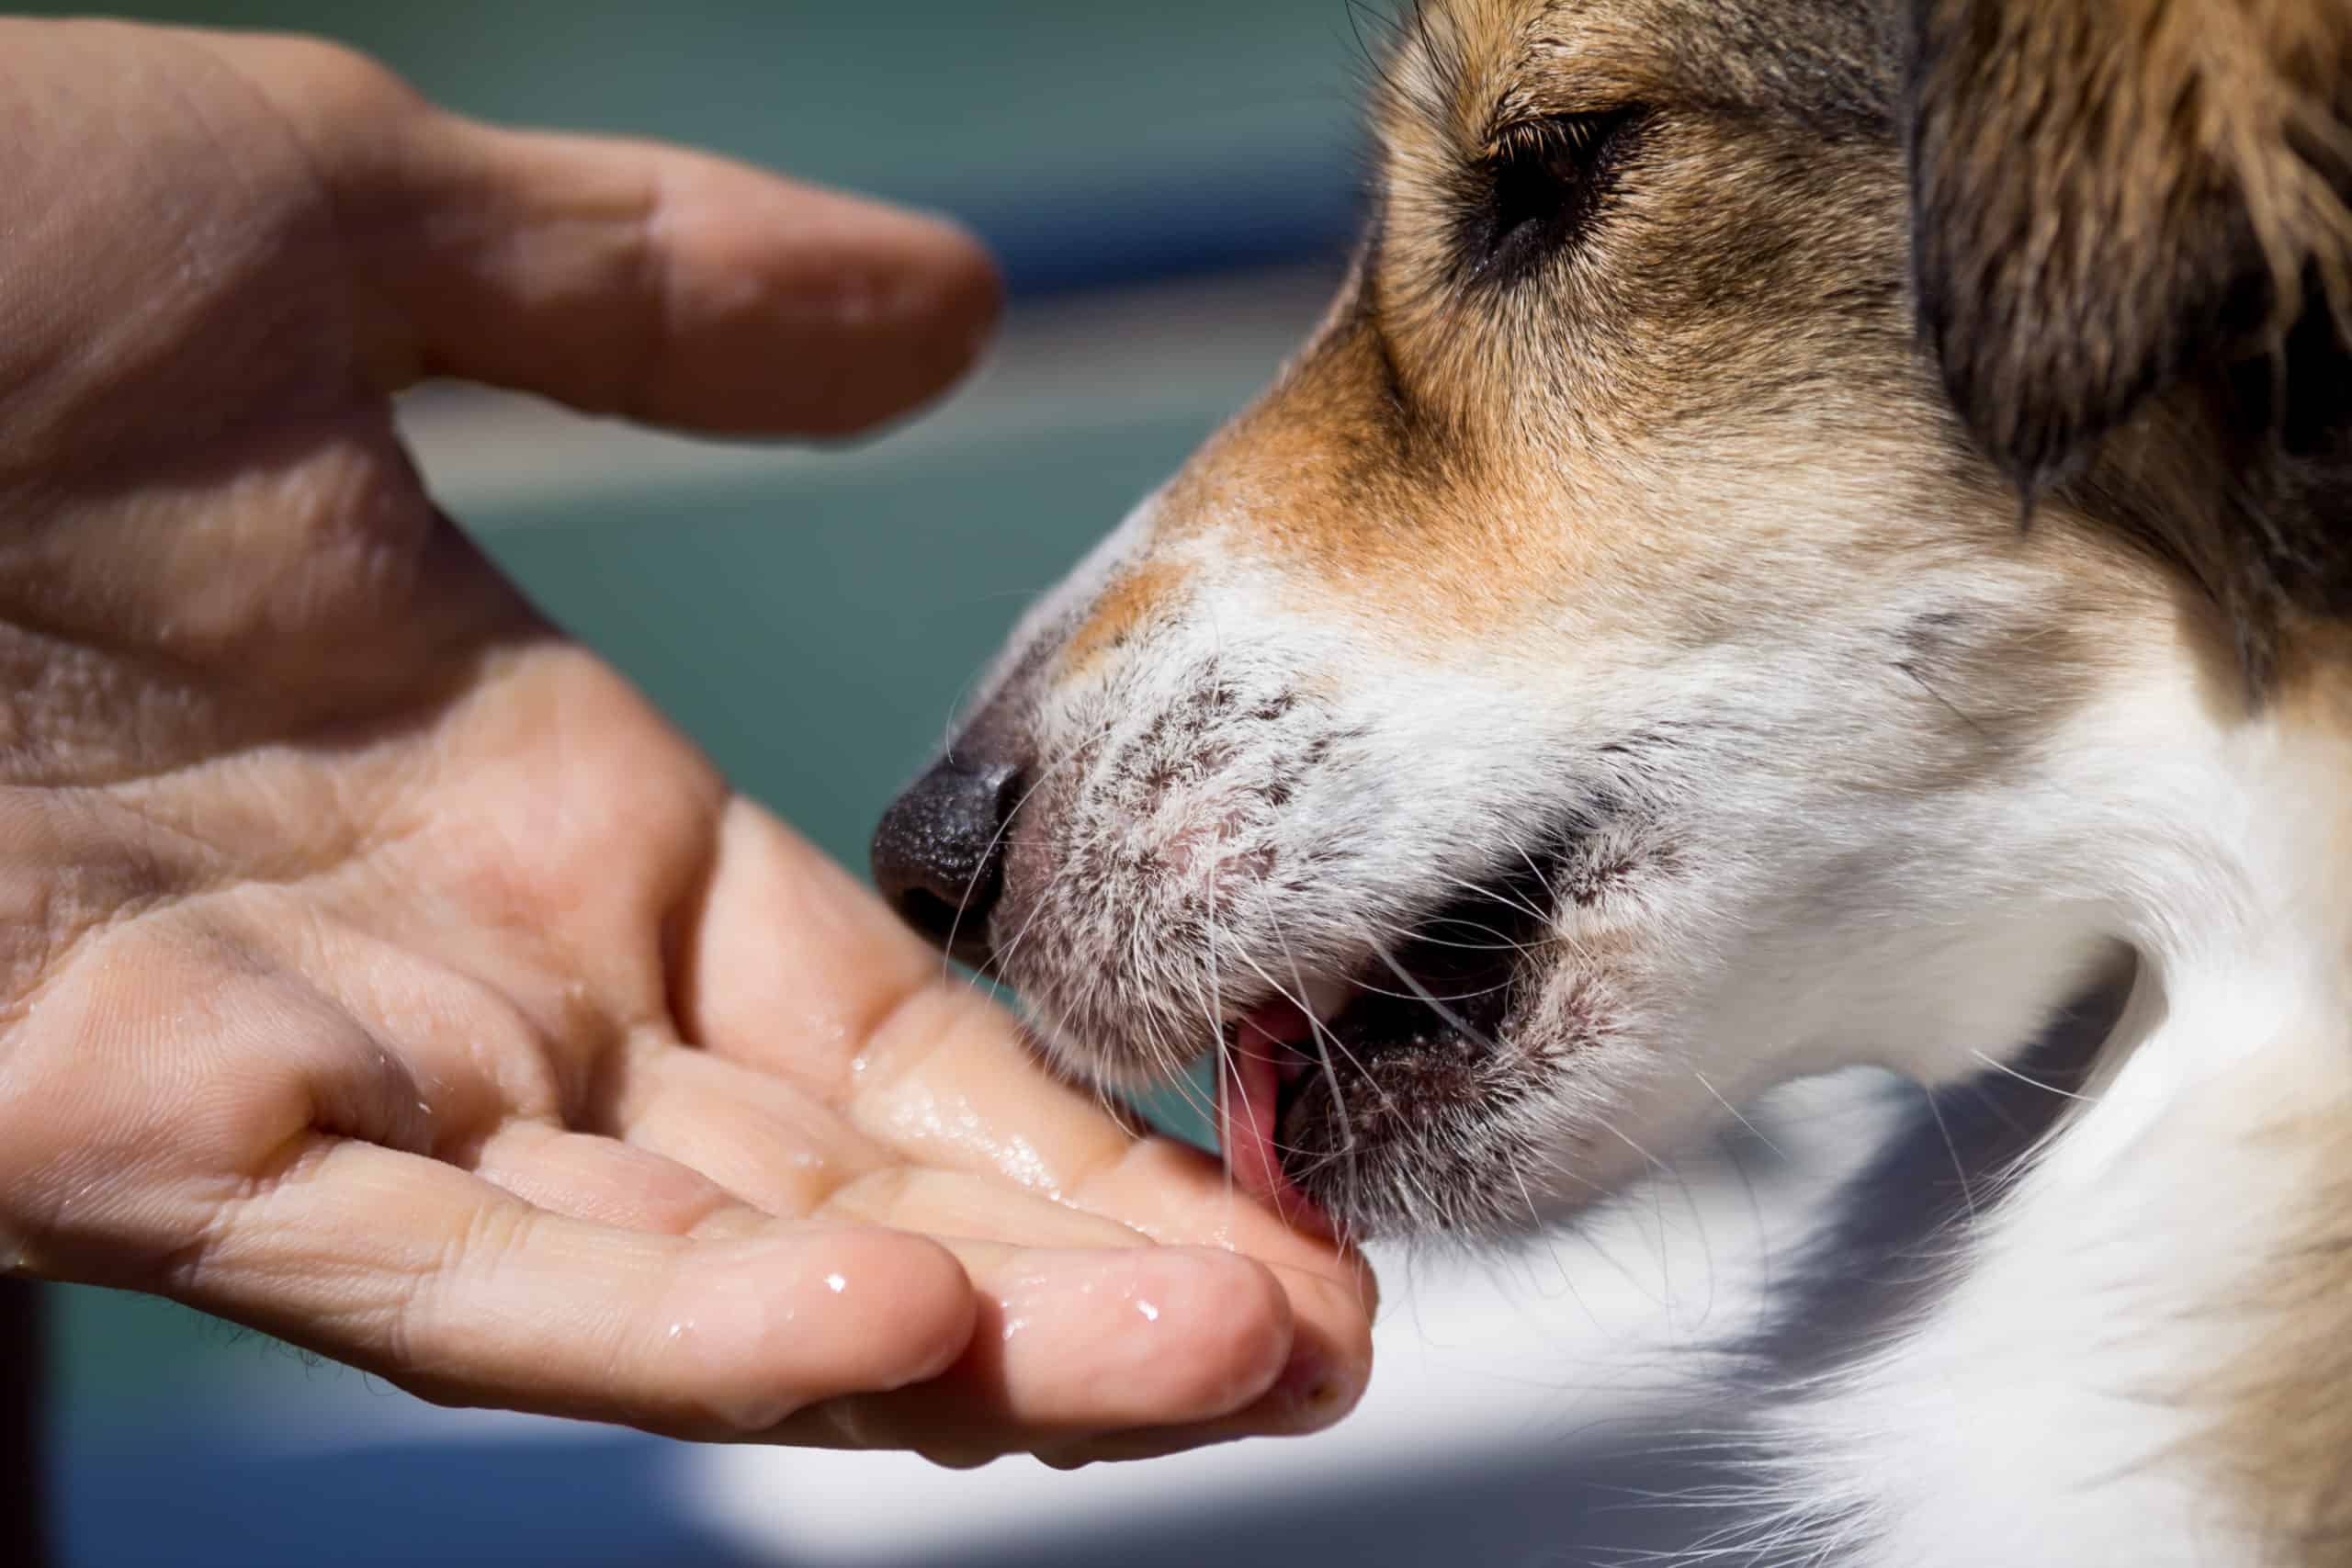 Why does my dog lick my hands and feet?